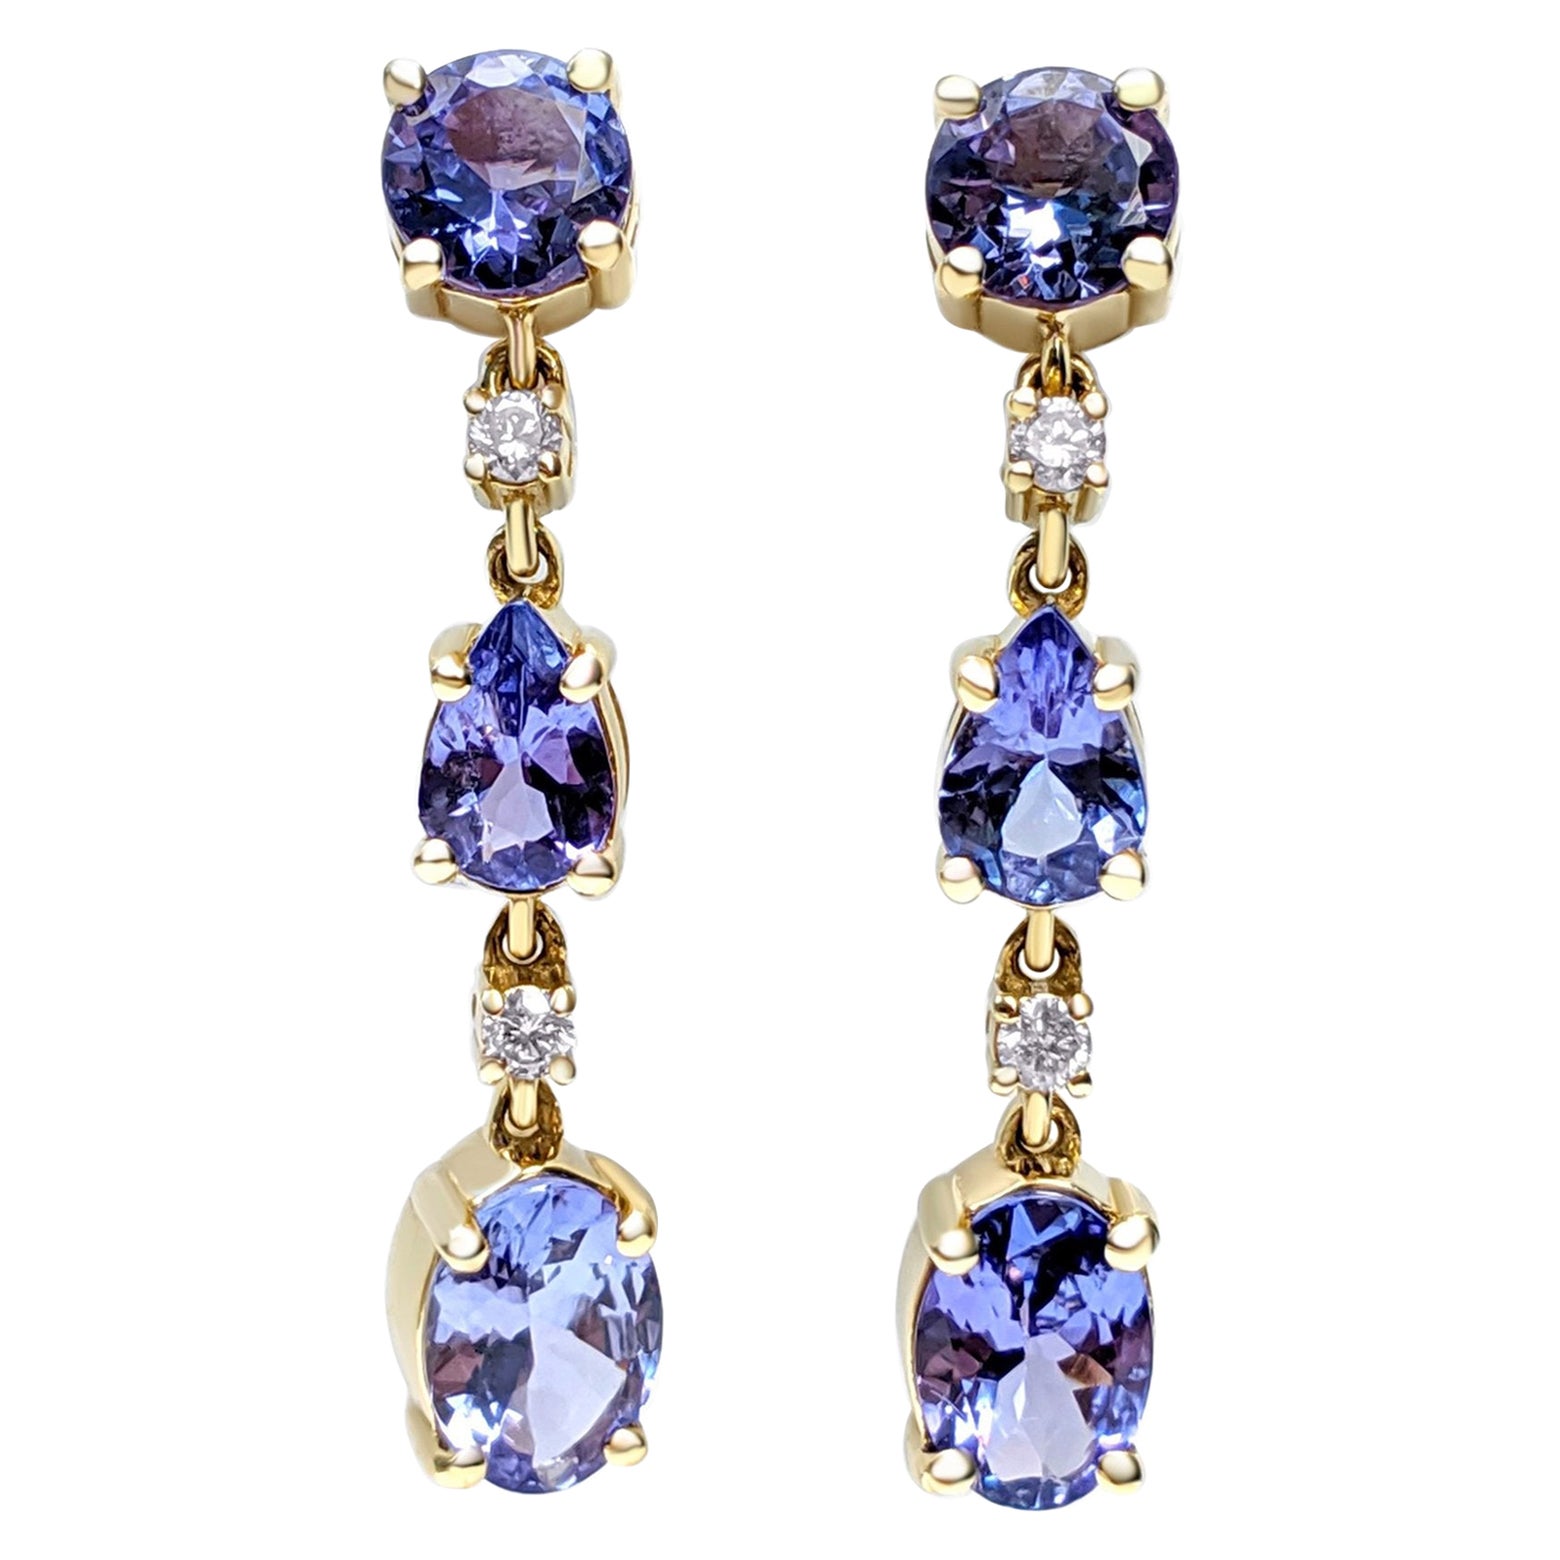 NO RESERVE! 3.20Ct Tanzanite and 0.15Ct Diamonds 14 kt. Yellow gold Earrings For Sale